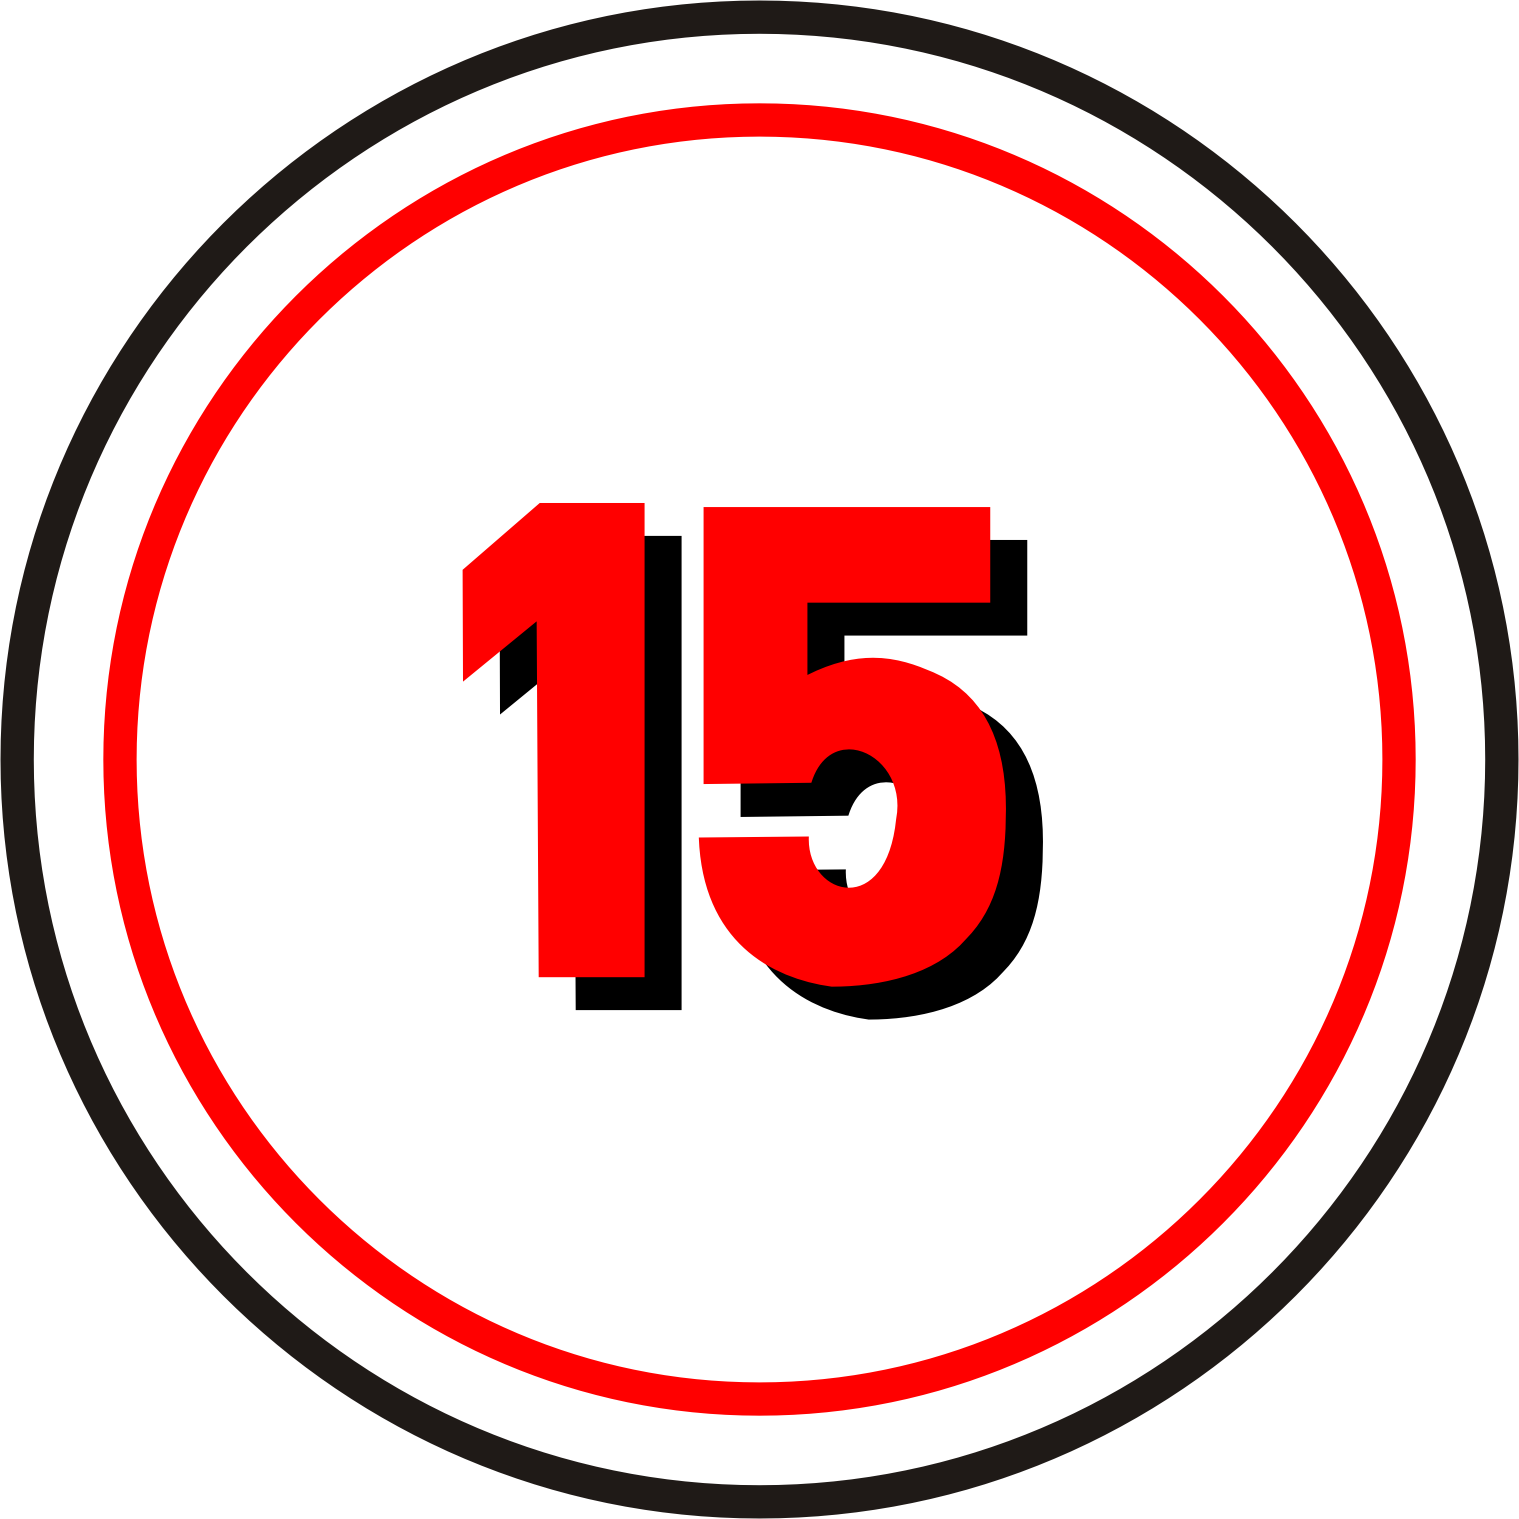 The 15th day of the 7th Hebre